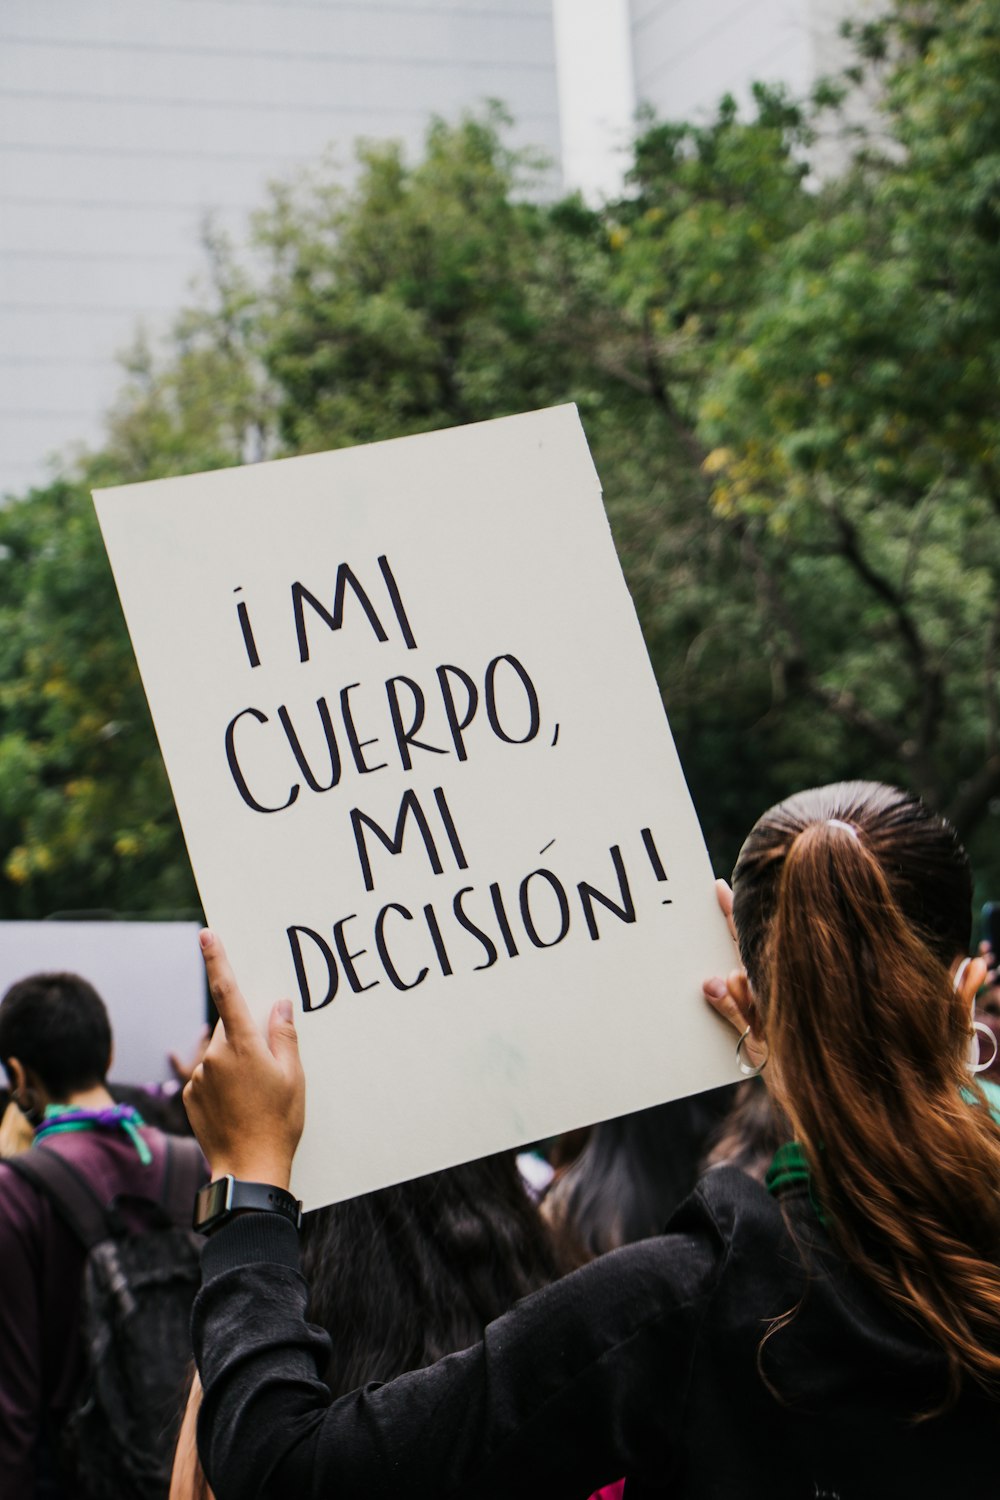 a person holding a sign that says i'm mi cuepro, mi decision